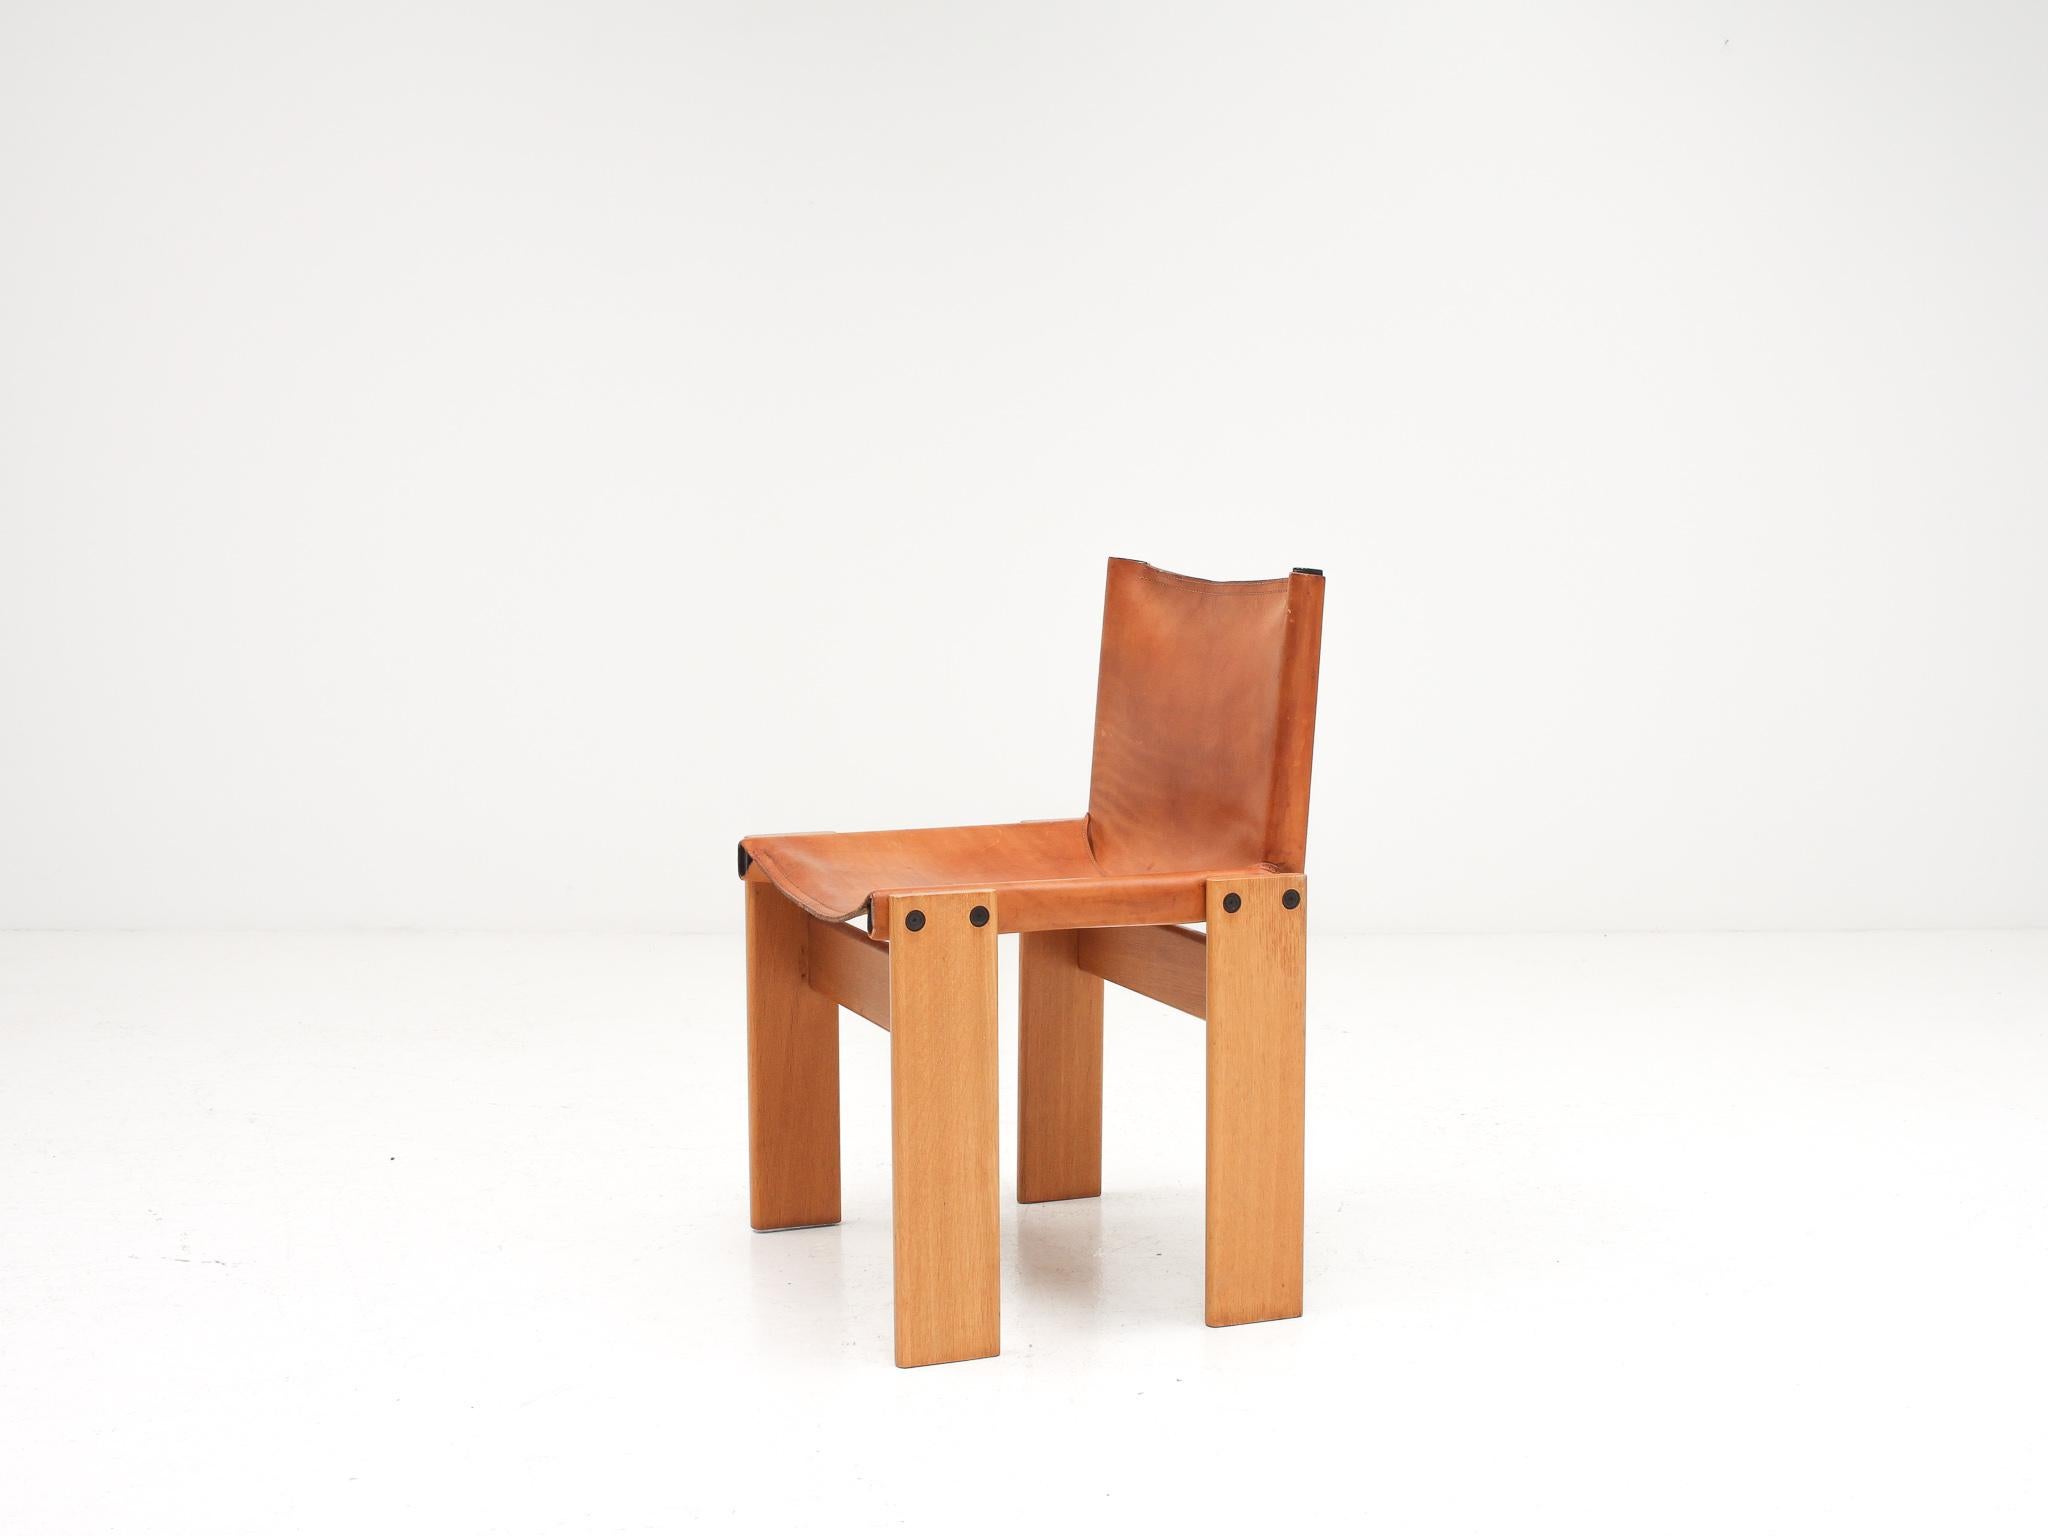 Wood 'Monk' Chair by Afra & Tobia Scarpa for Molteni, Italy, 1974